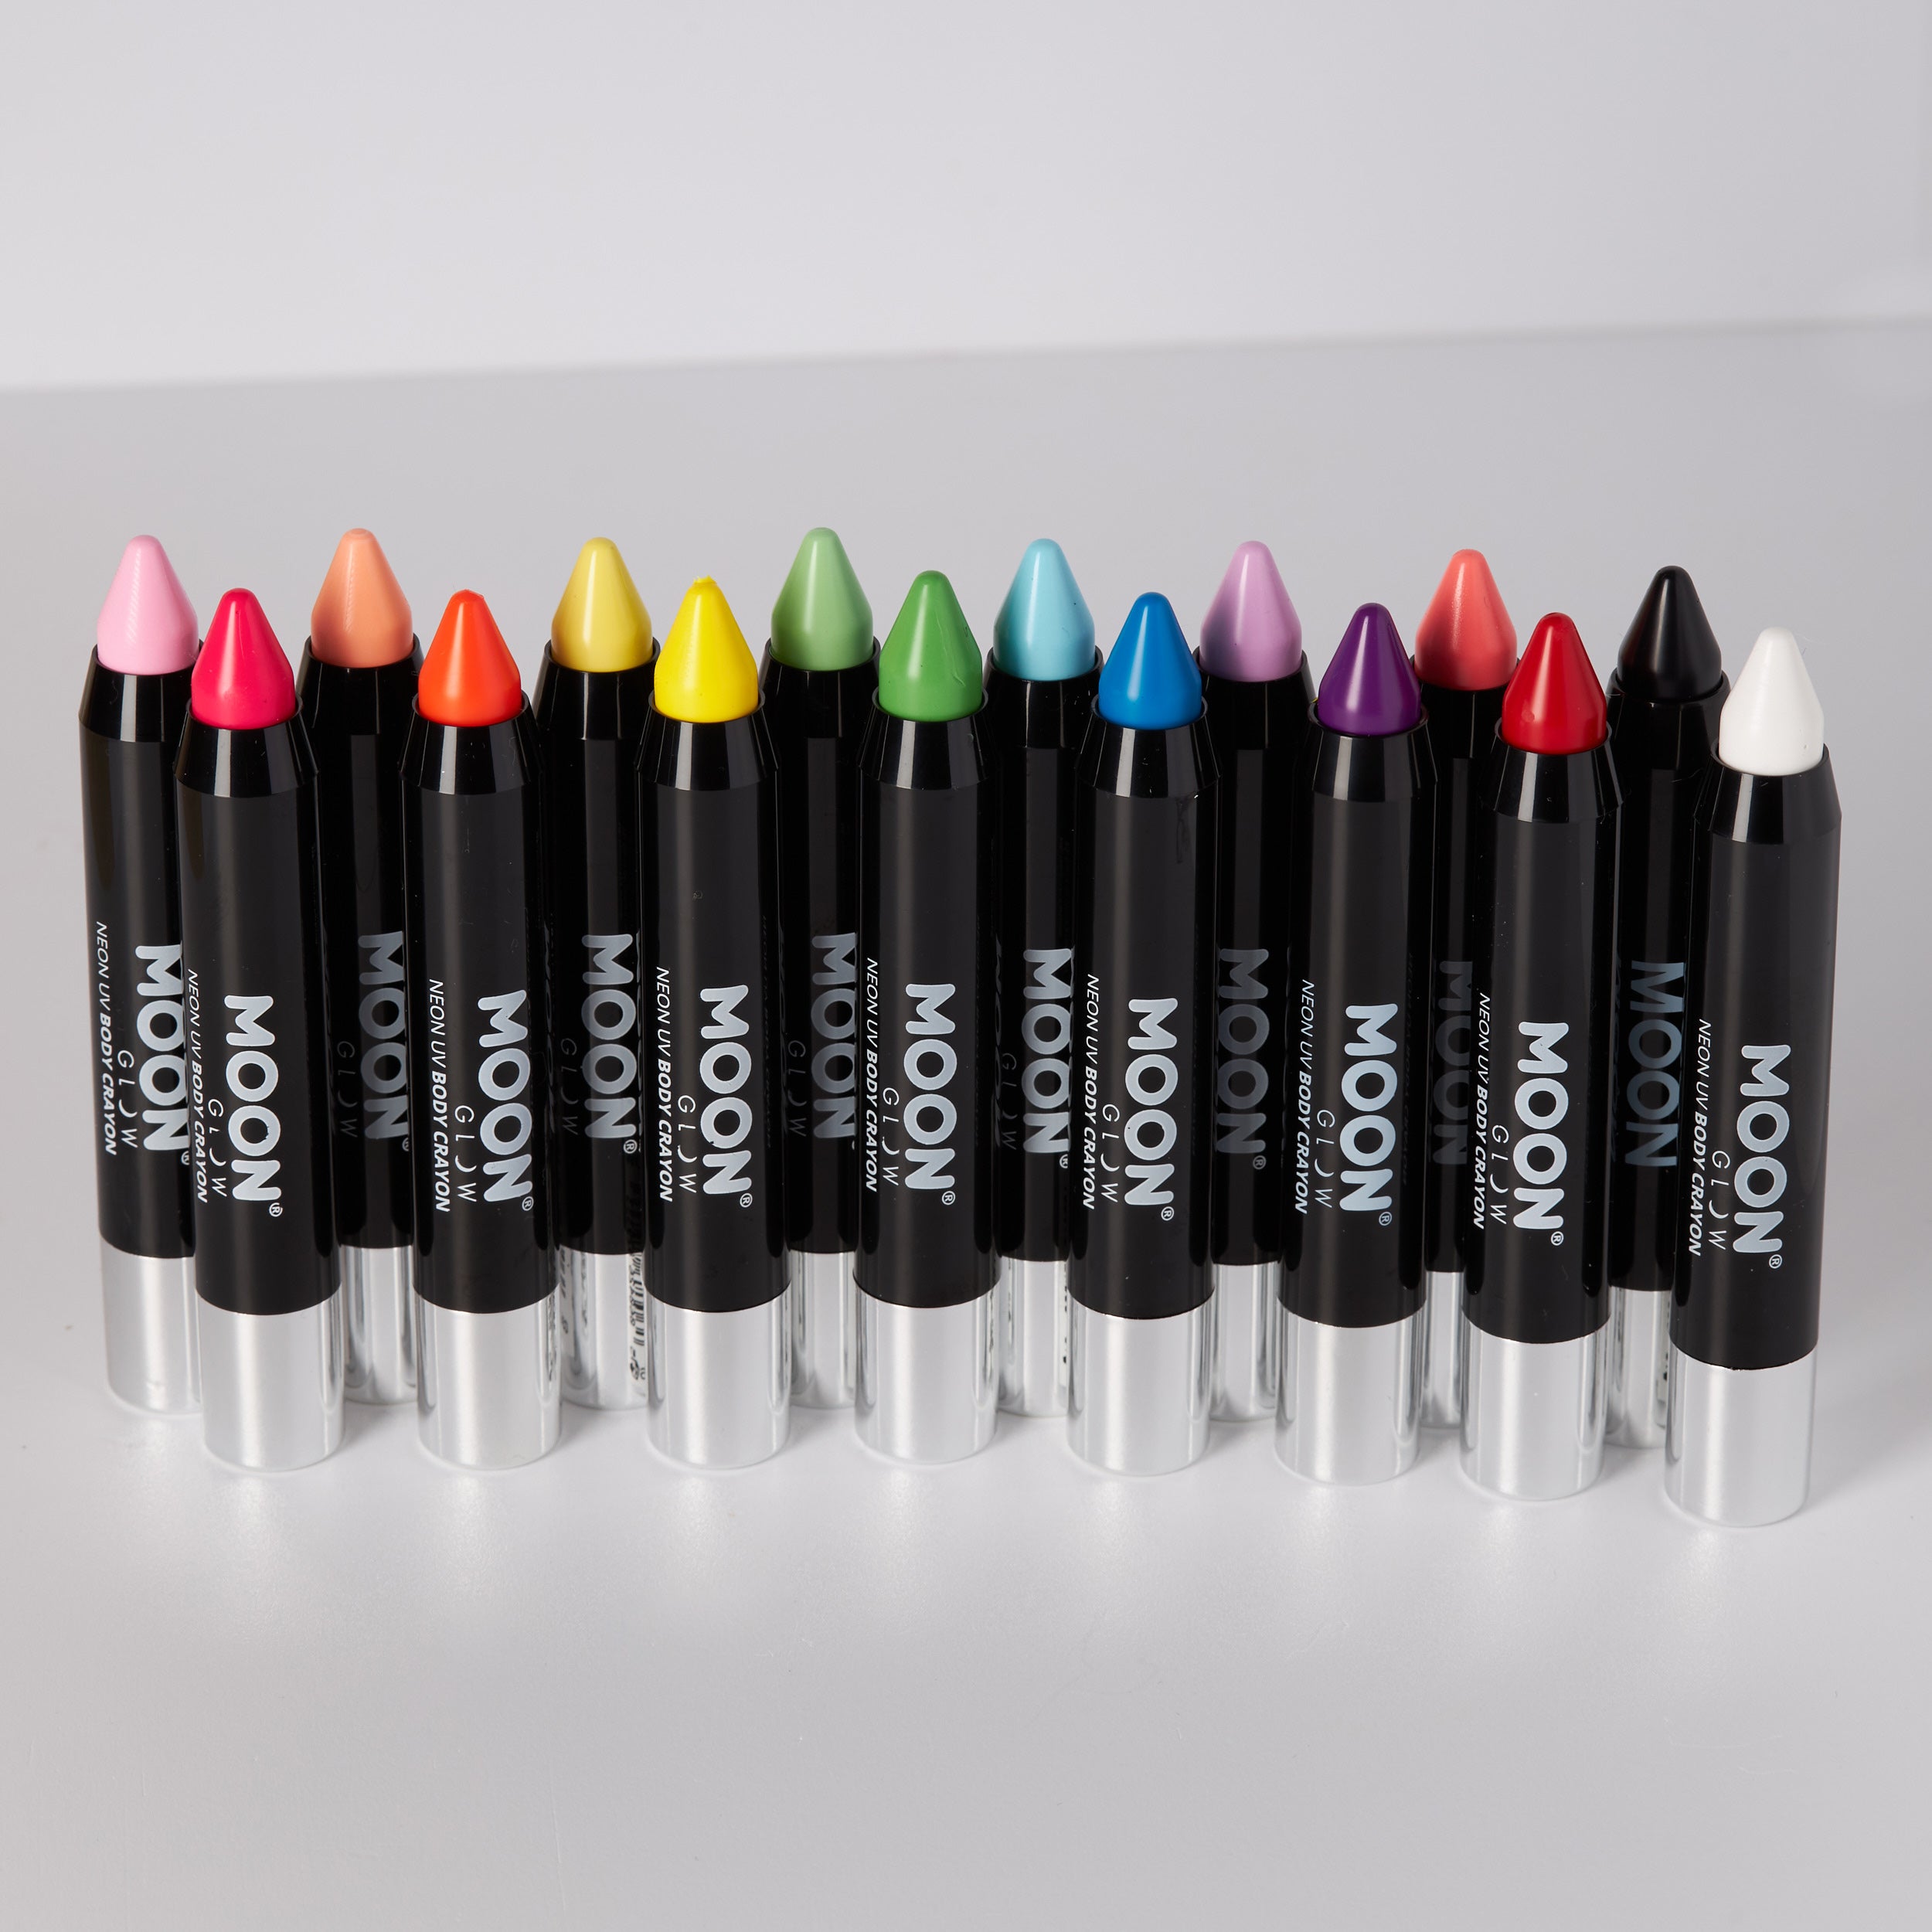 Neon UV Glow Blacklight Face & Body Crayons by Moon Glow